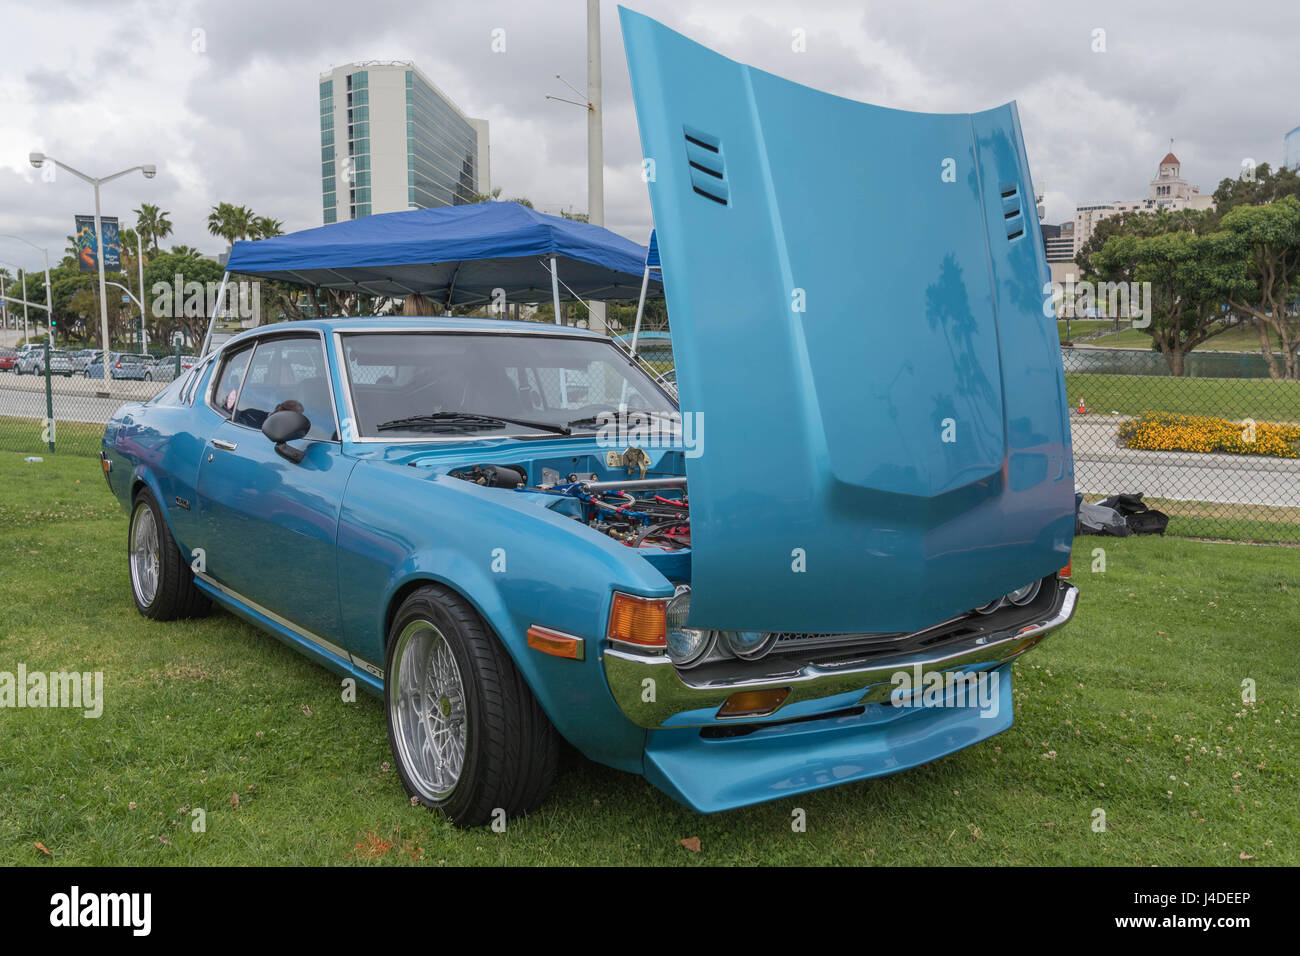 Long Beach, USA - May 6 2017: Toyota Celica GT on display during the 22nd annual All Toyotafest. Stock Photo